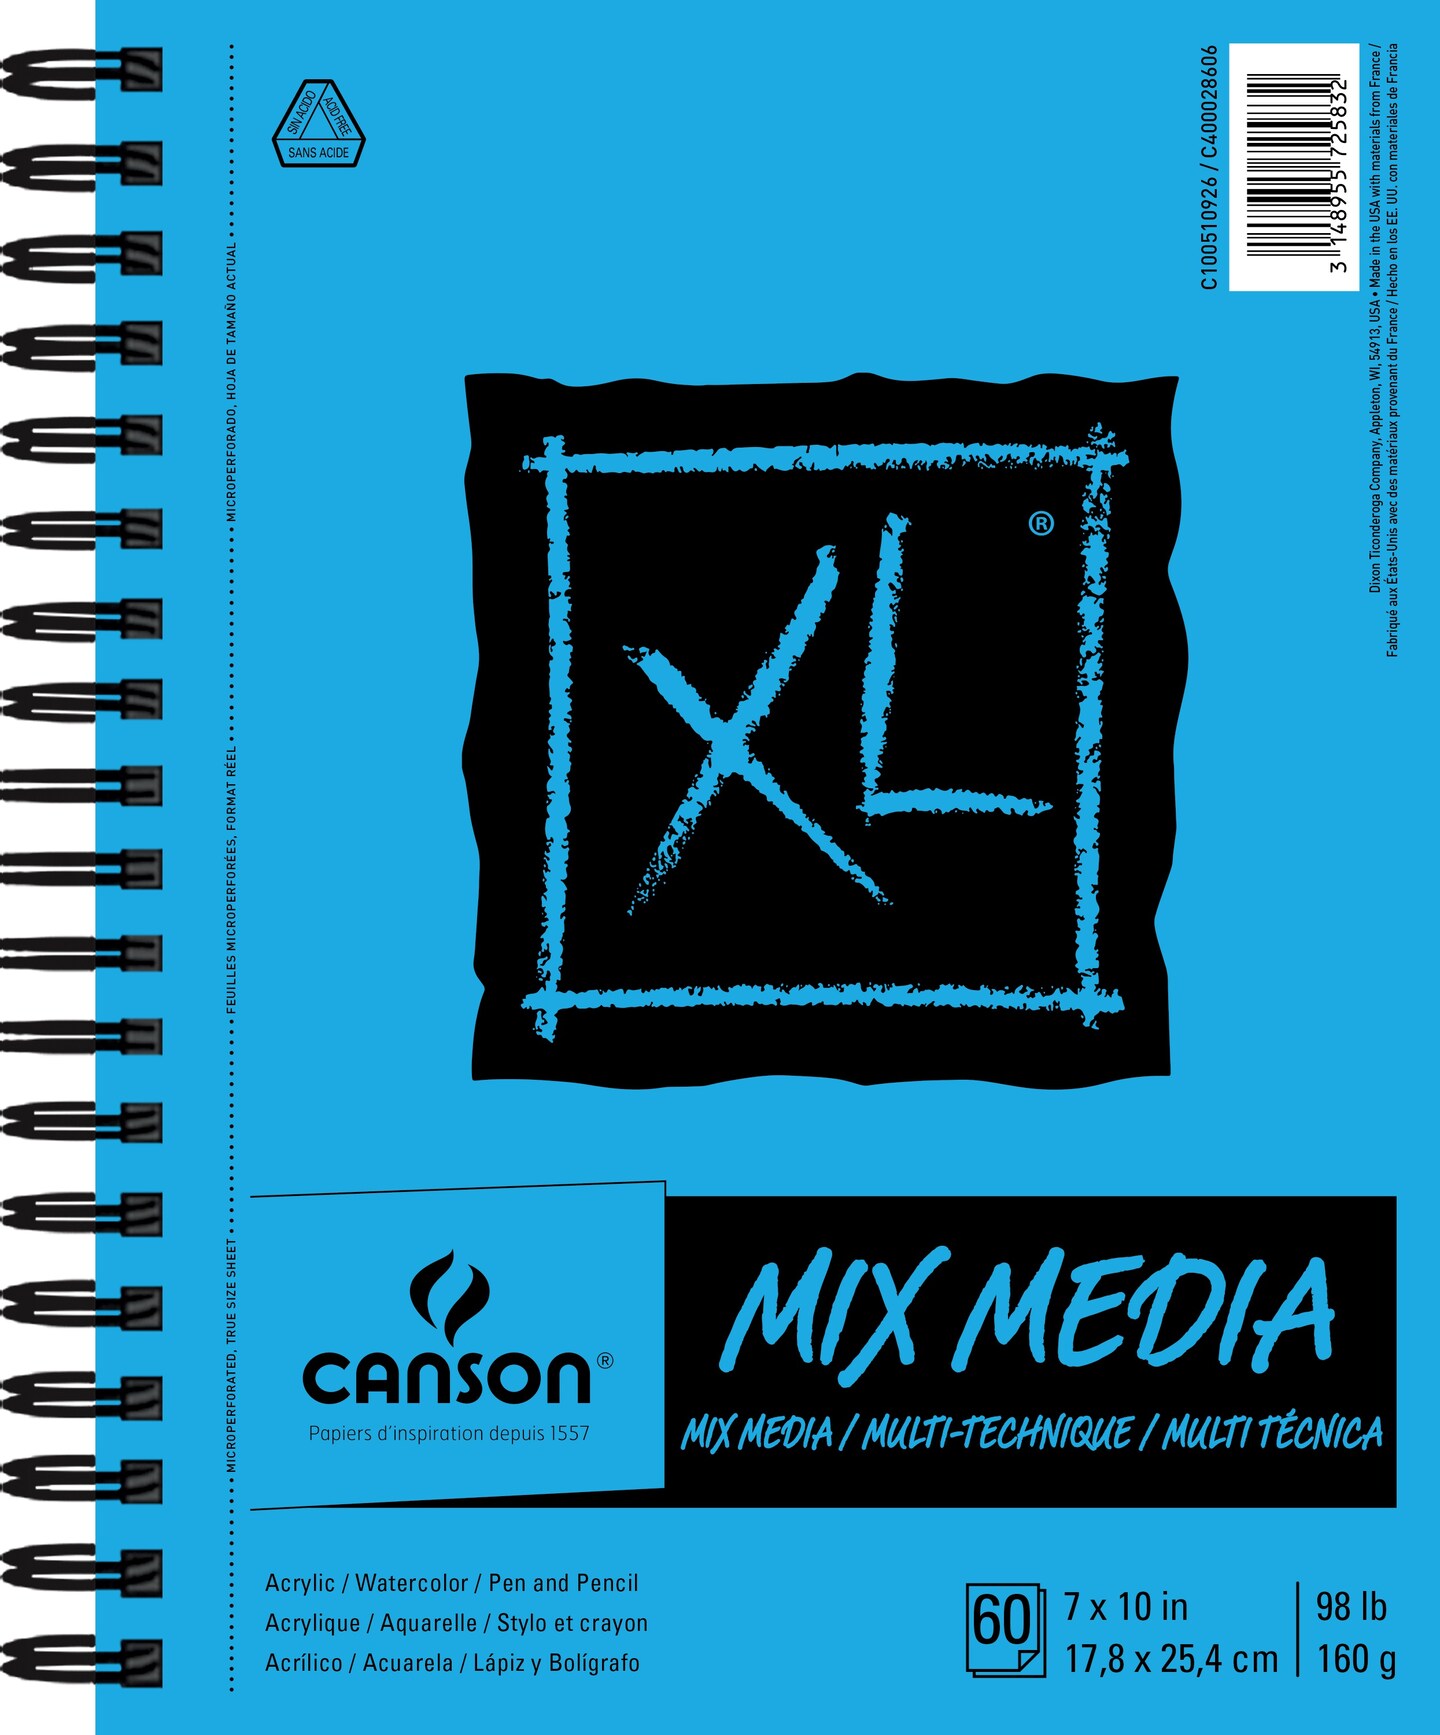 Canson Xl Spiral Multi-Media Paper Pad 7X10-60 Sheets